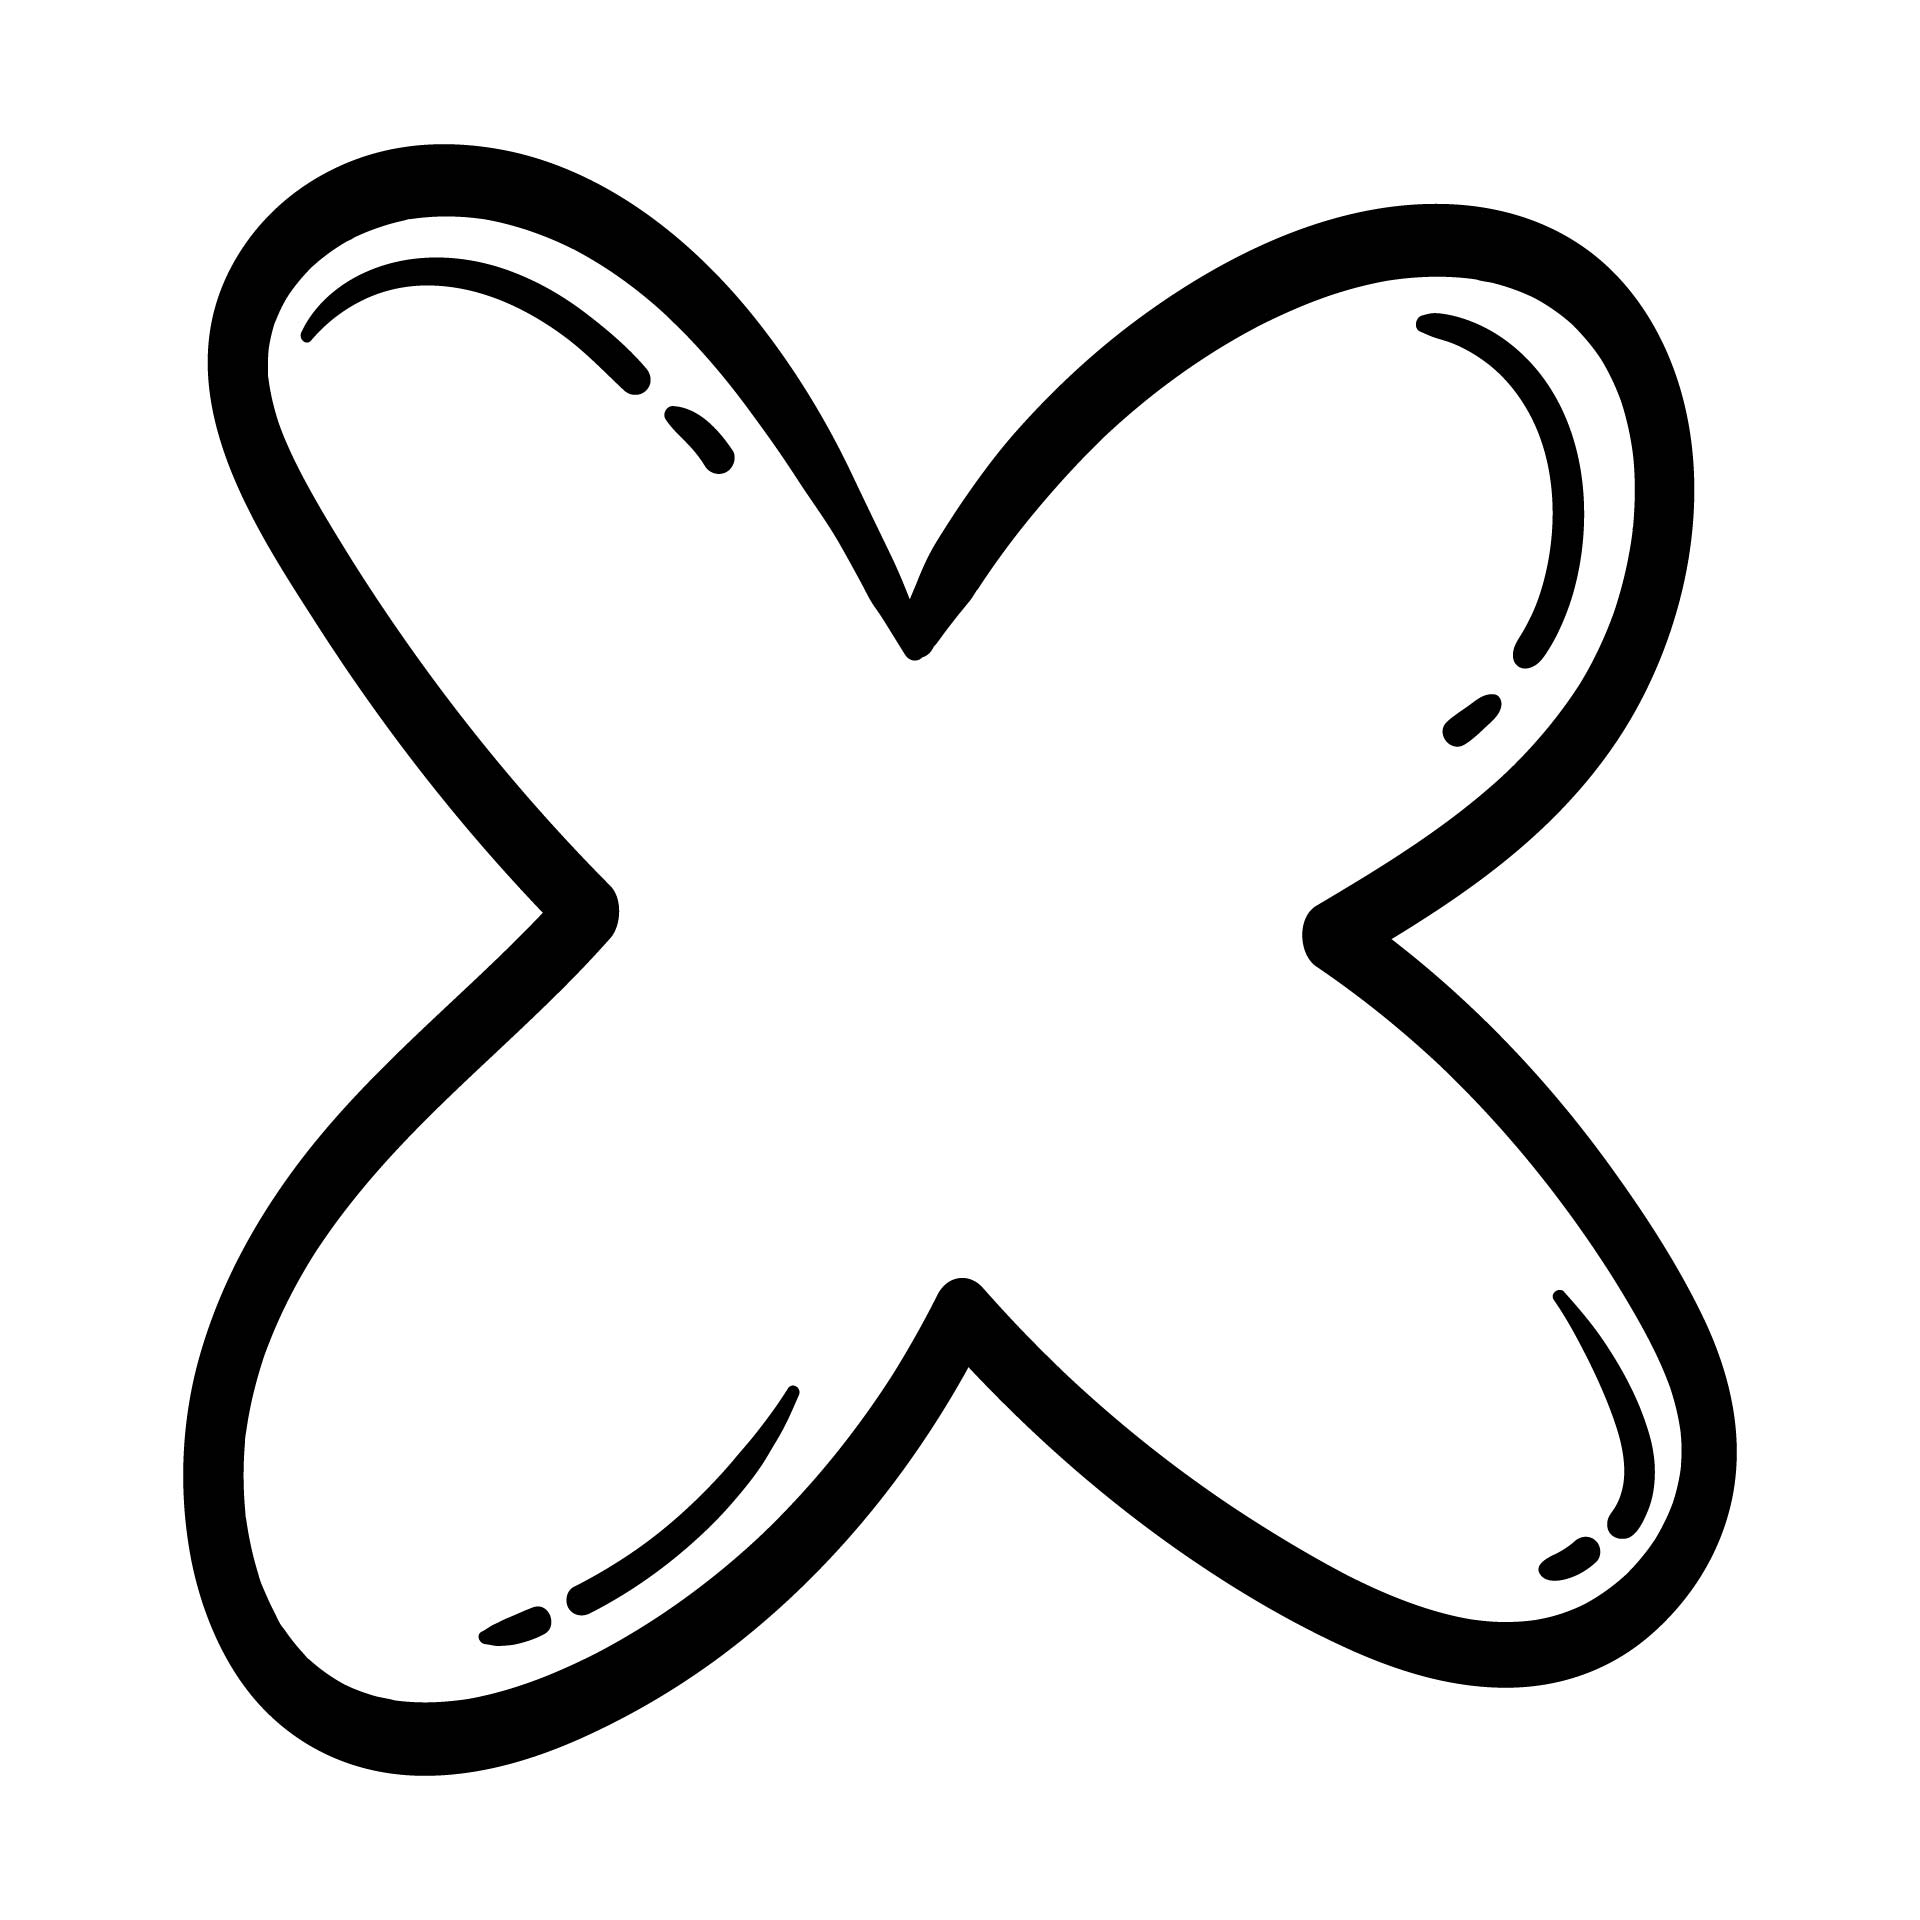 The Letter X In Bubble Letters